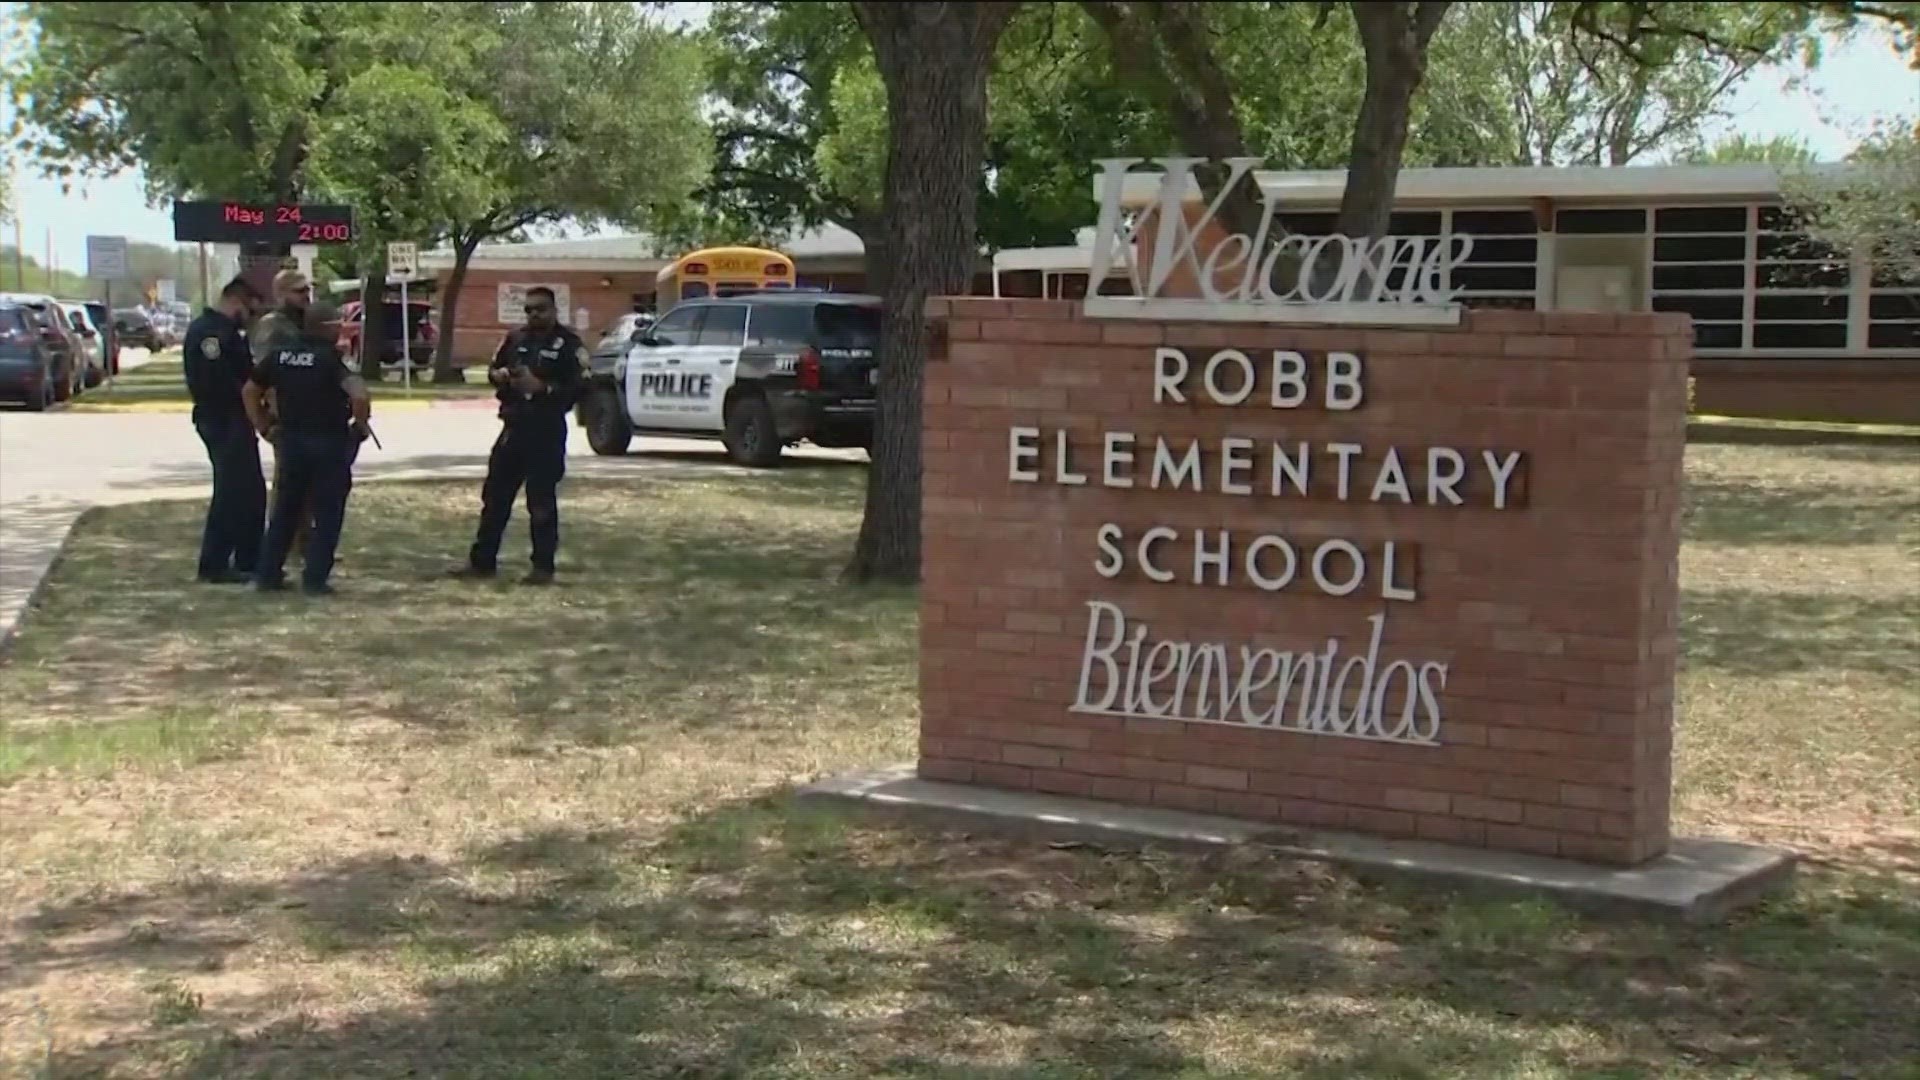 The Department of Justice's critical incident report into the 2022 shooting at Robb Elementary School was released on Thursday.